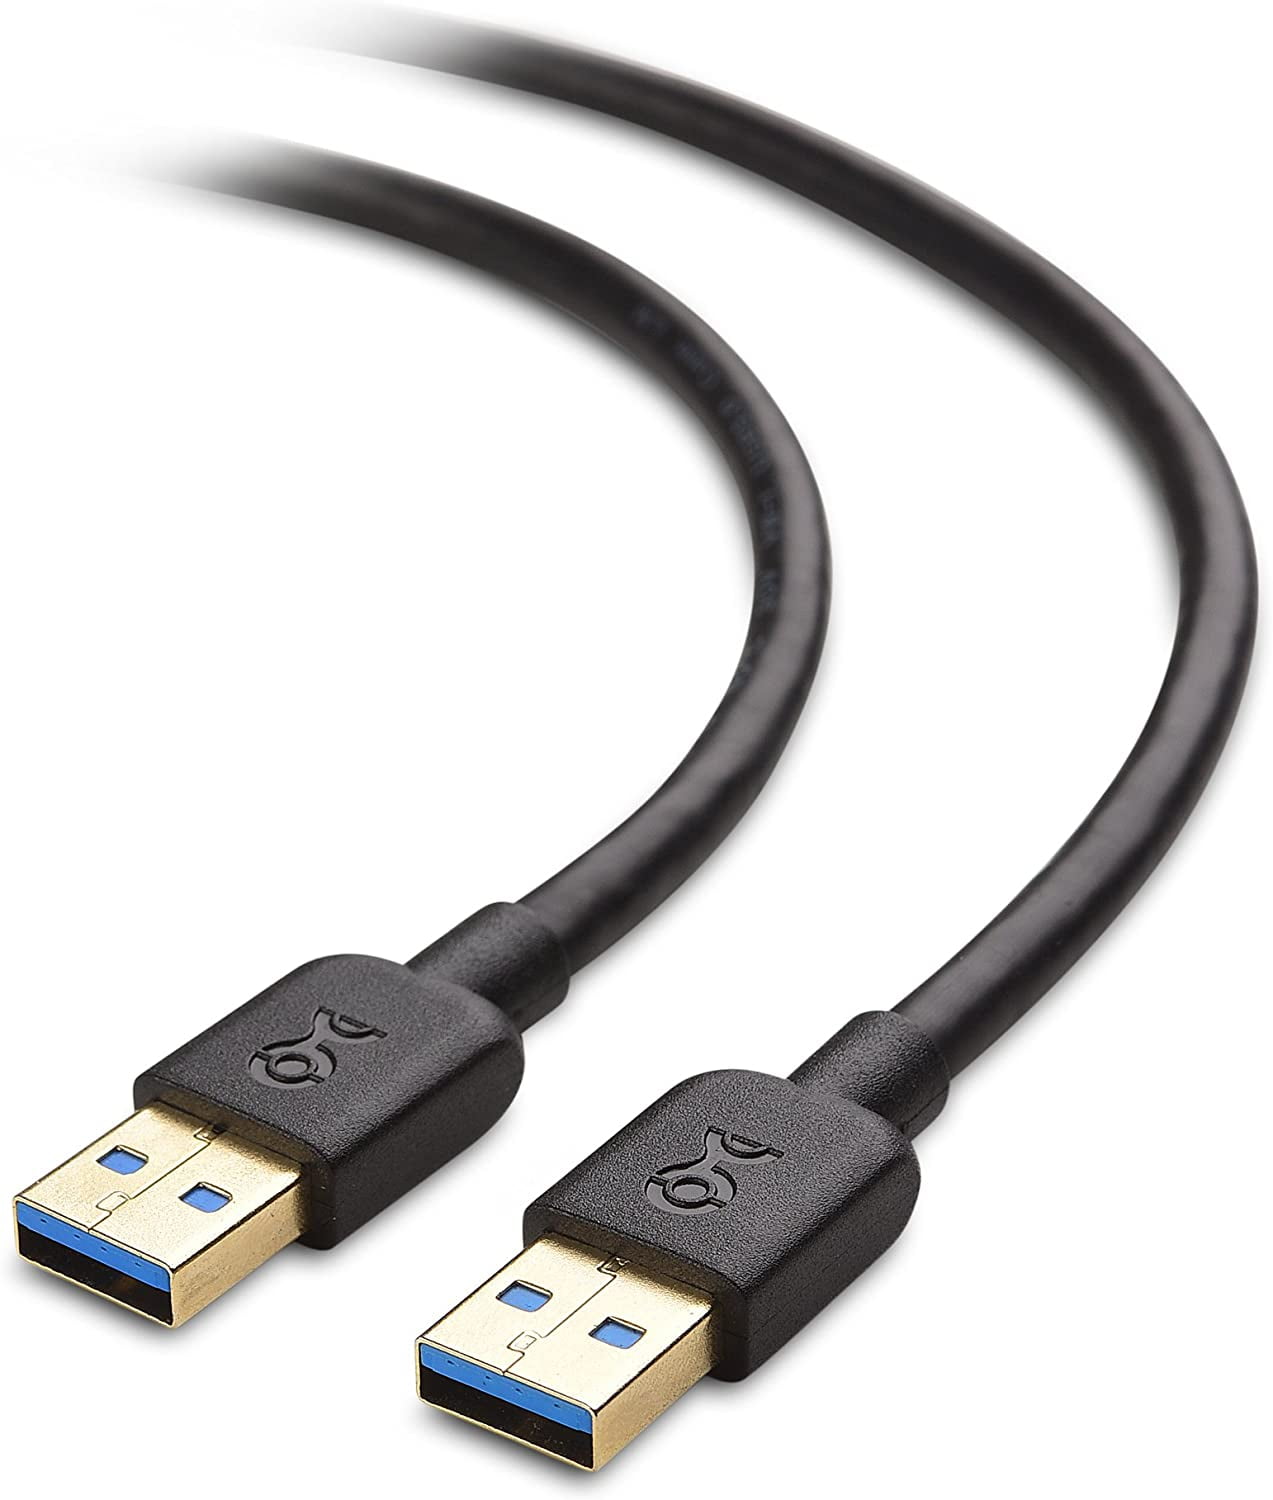 Cable Matters USB to USB Cable (USB Male to Male Cable) in Black